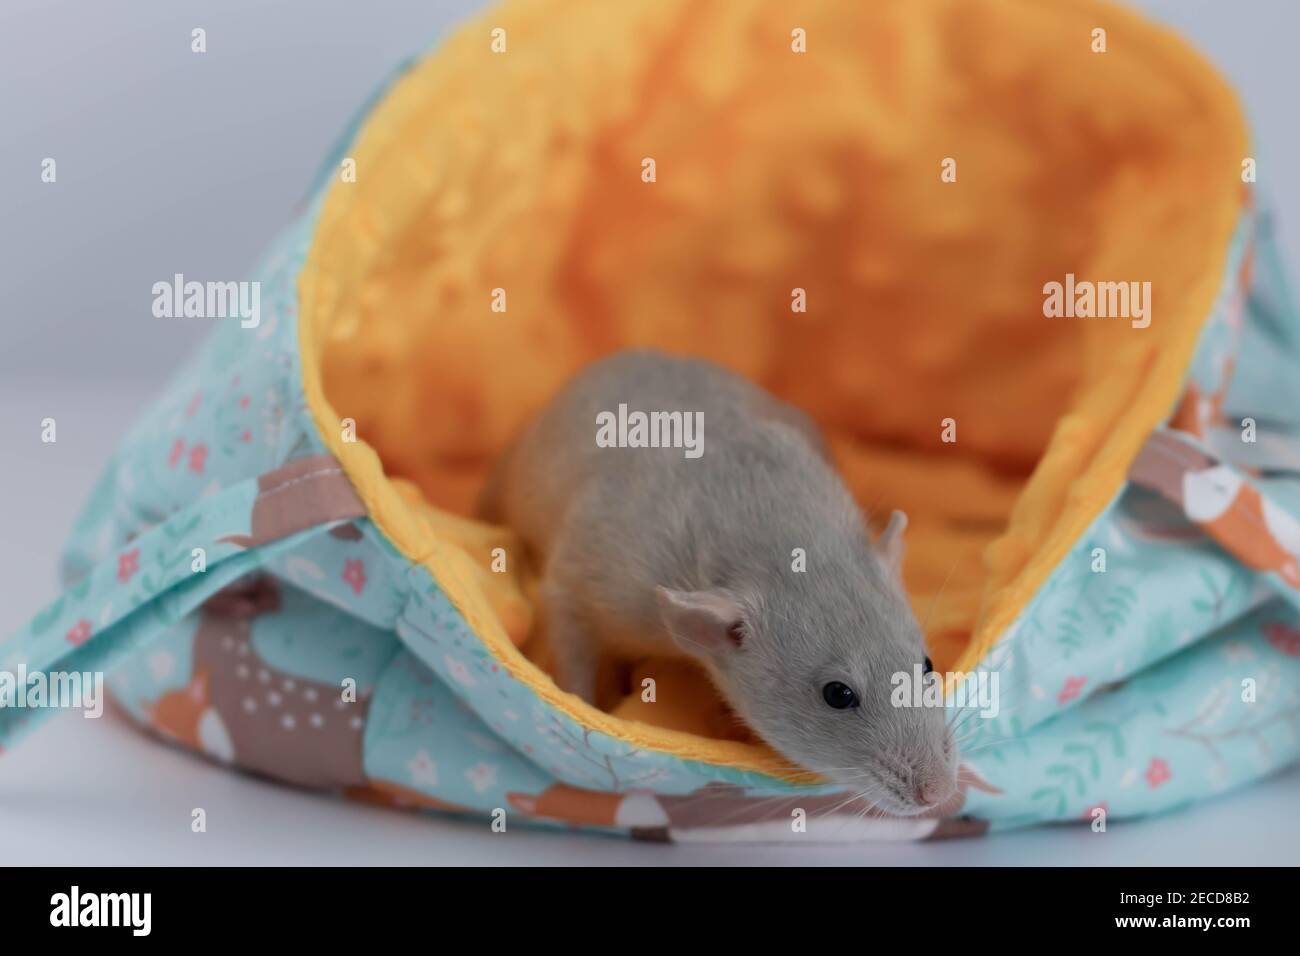 A decorative cute grey rat peeps out of the fabric hammock-house. Close-up of a rat's face Stock Photo